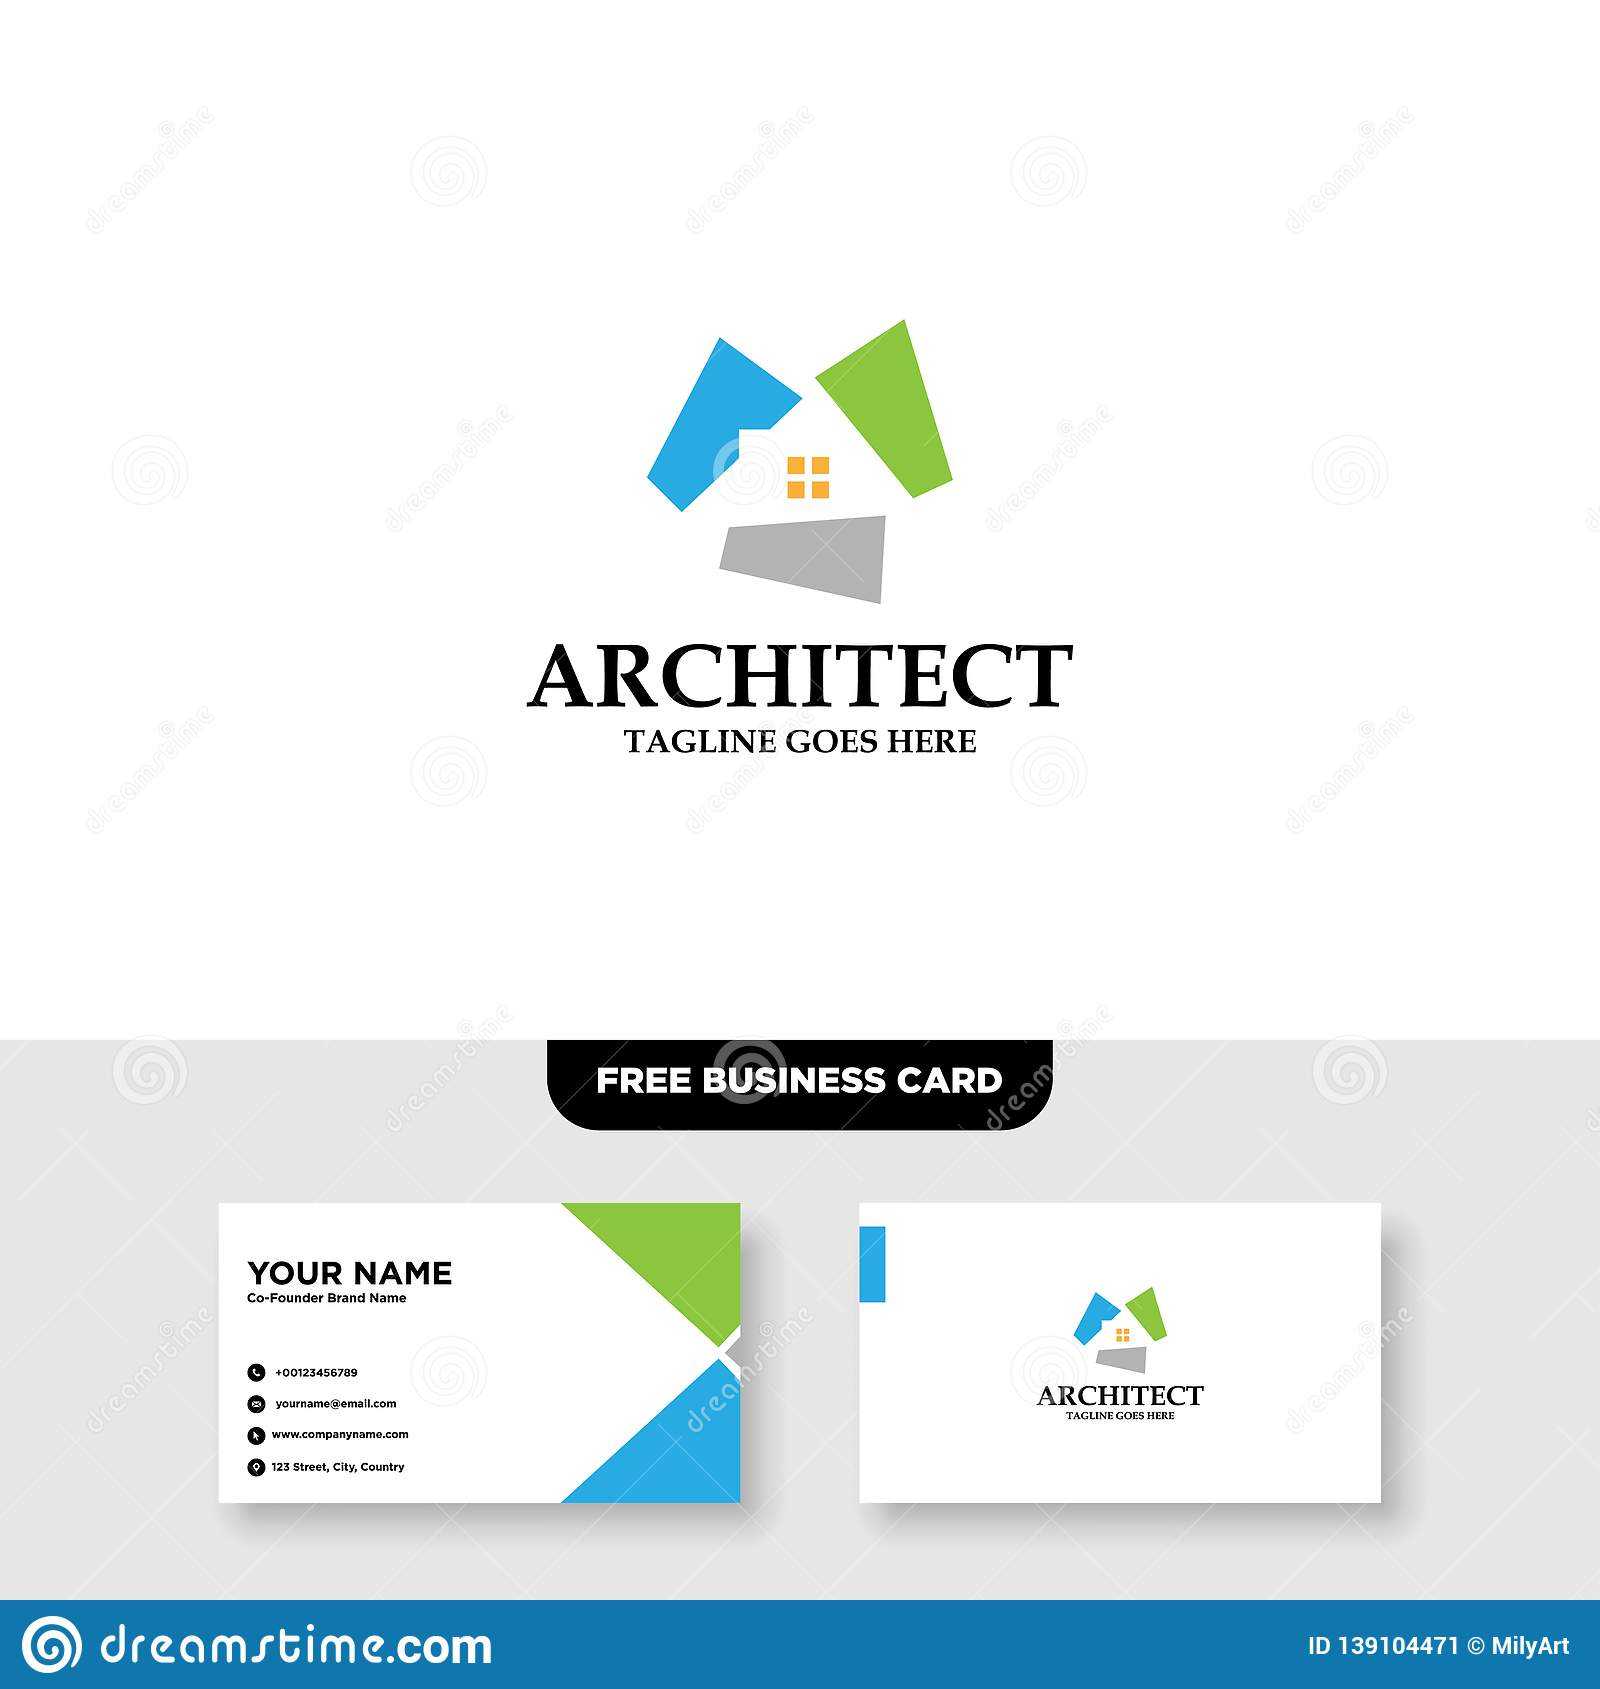 Architecture Company, Construction, Architect, Vector Logo In Ibm Business Card Template